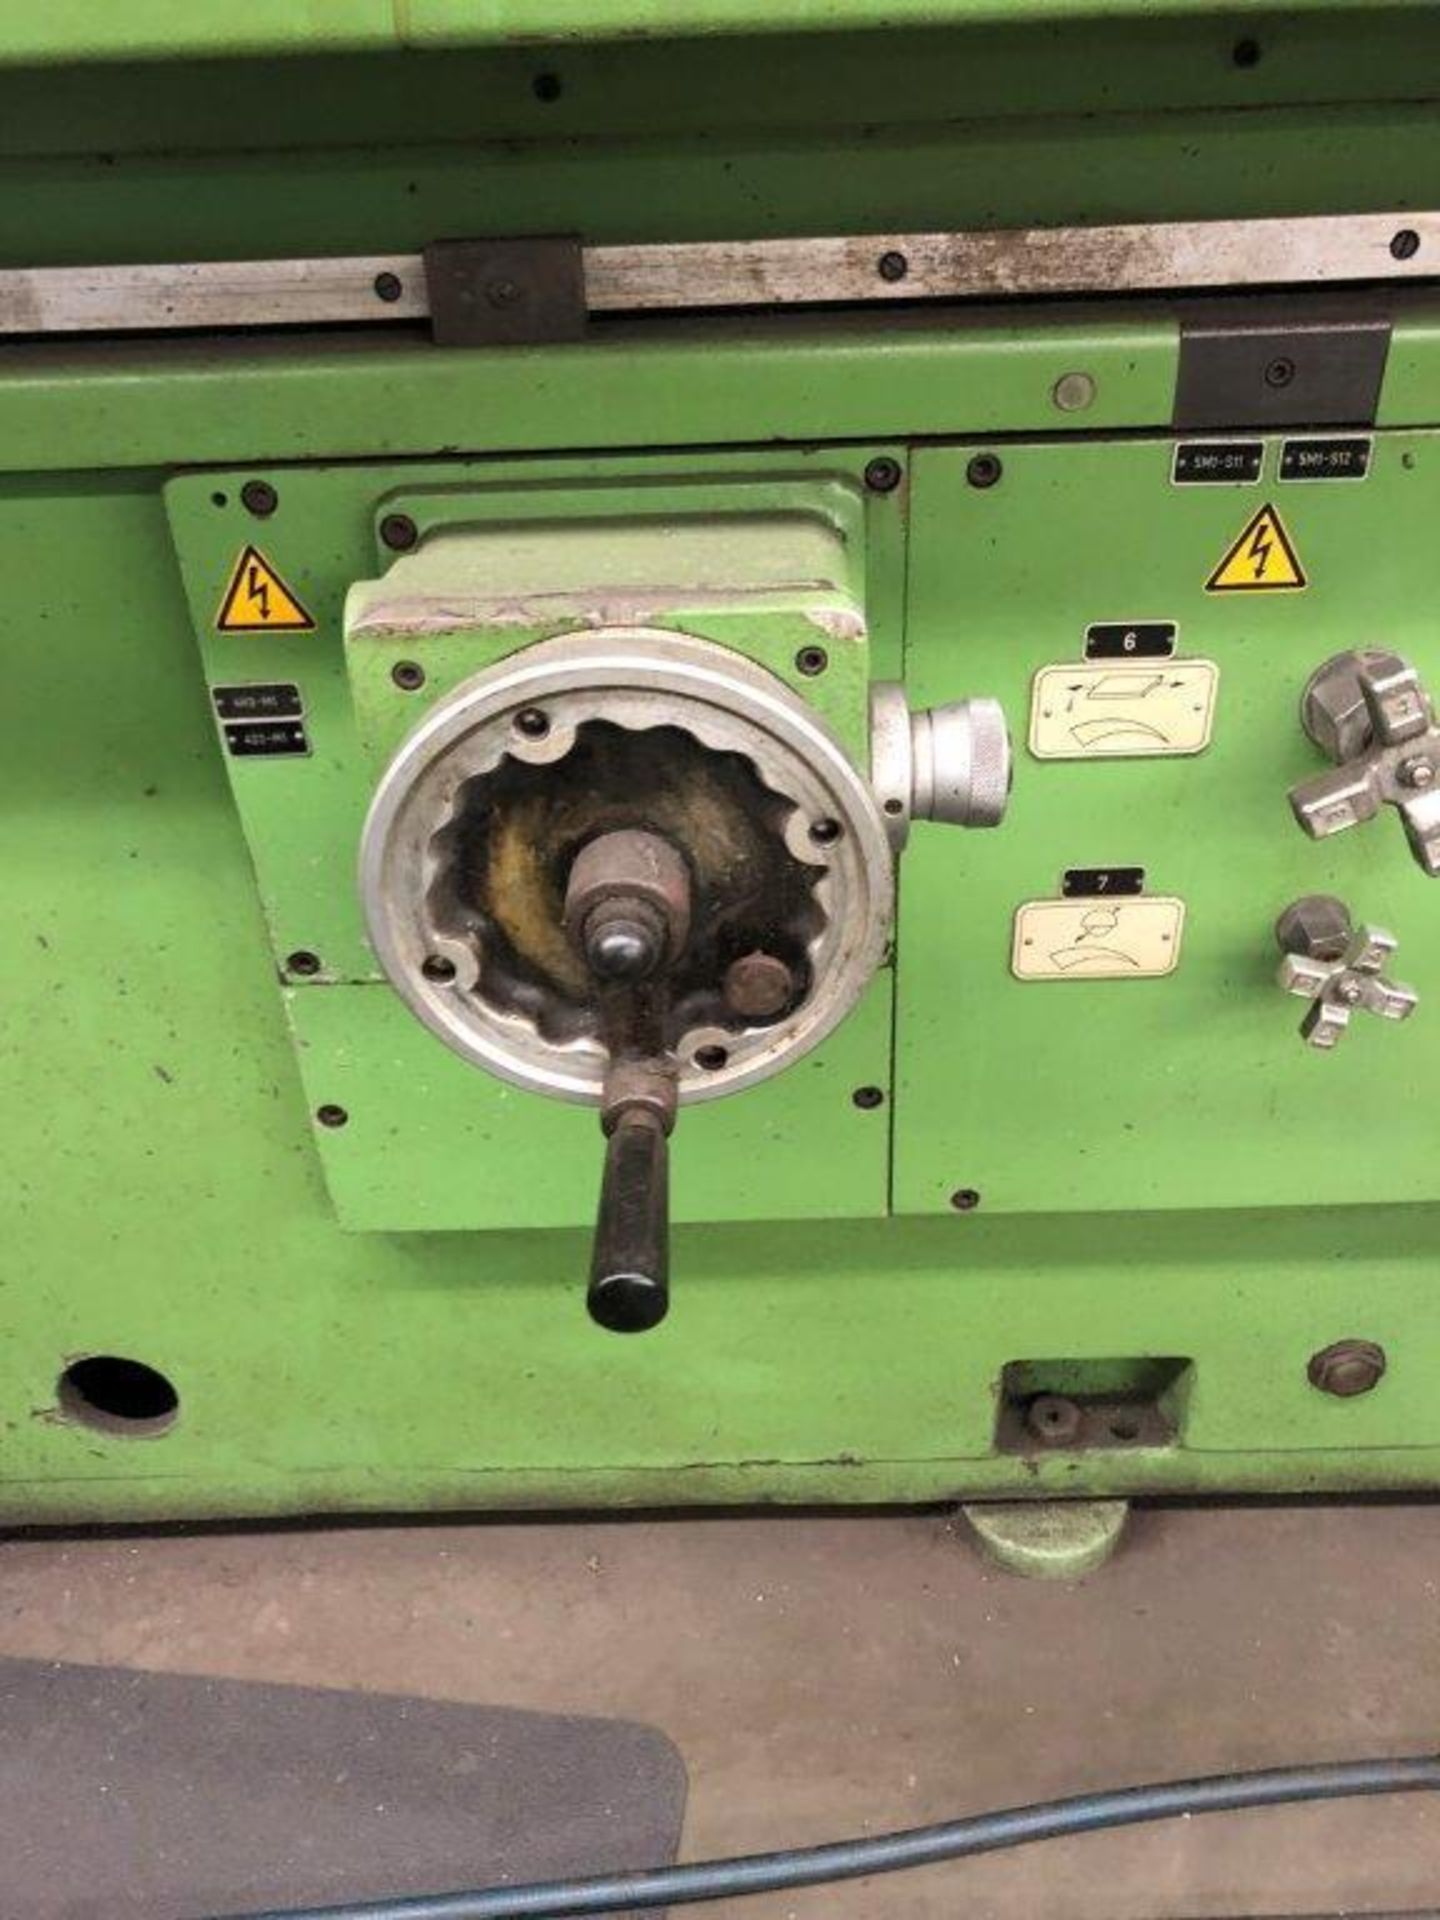 Aba FFU 1000/50 Surface Grinder, S/N 207990 (New 1986), 15.75" x 39" Electro-Magnetic Chuck - Image 7 of 10